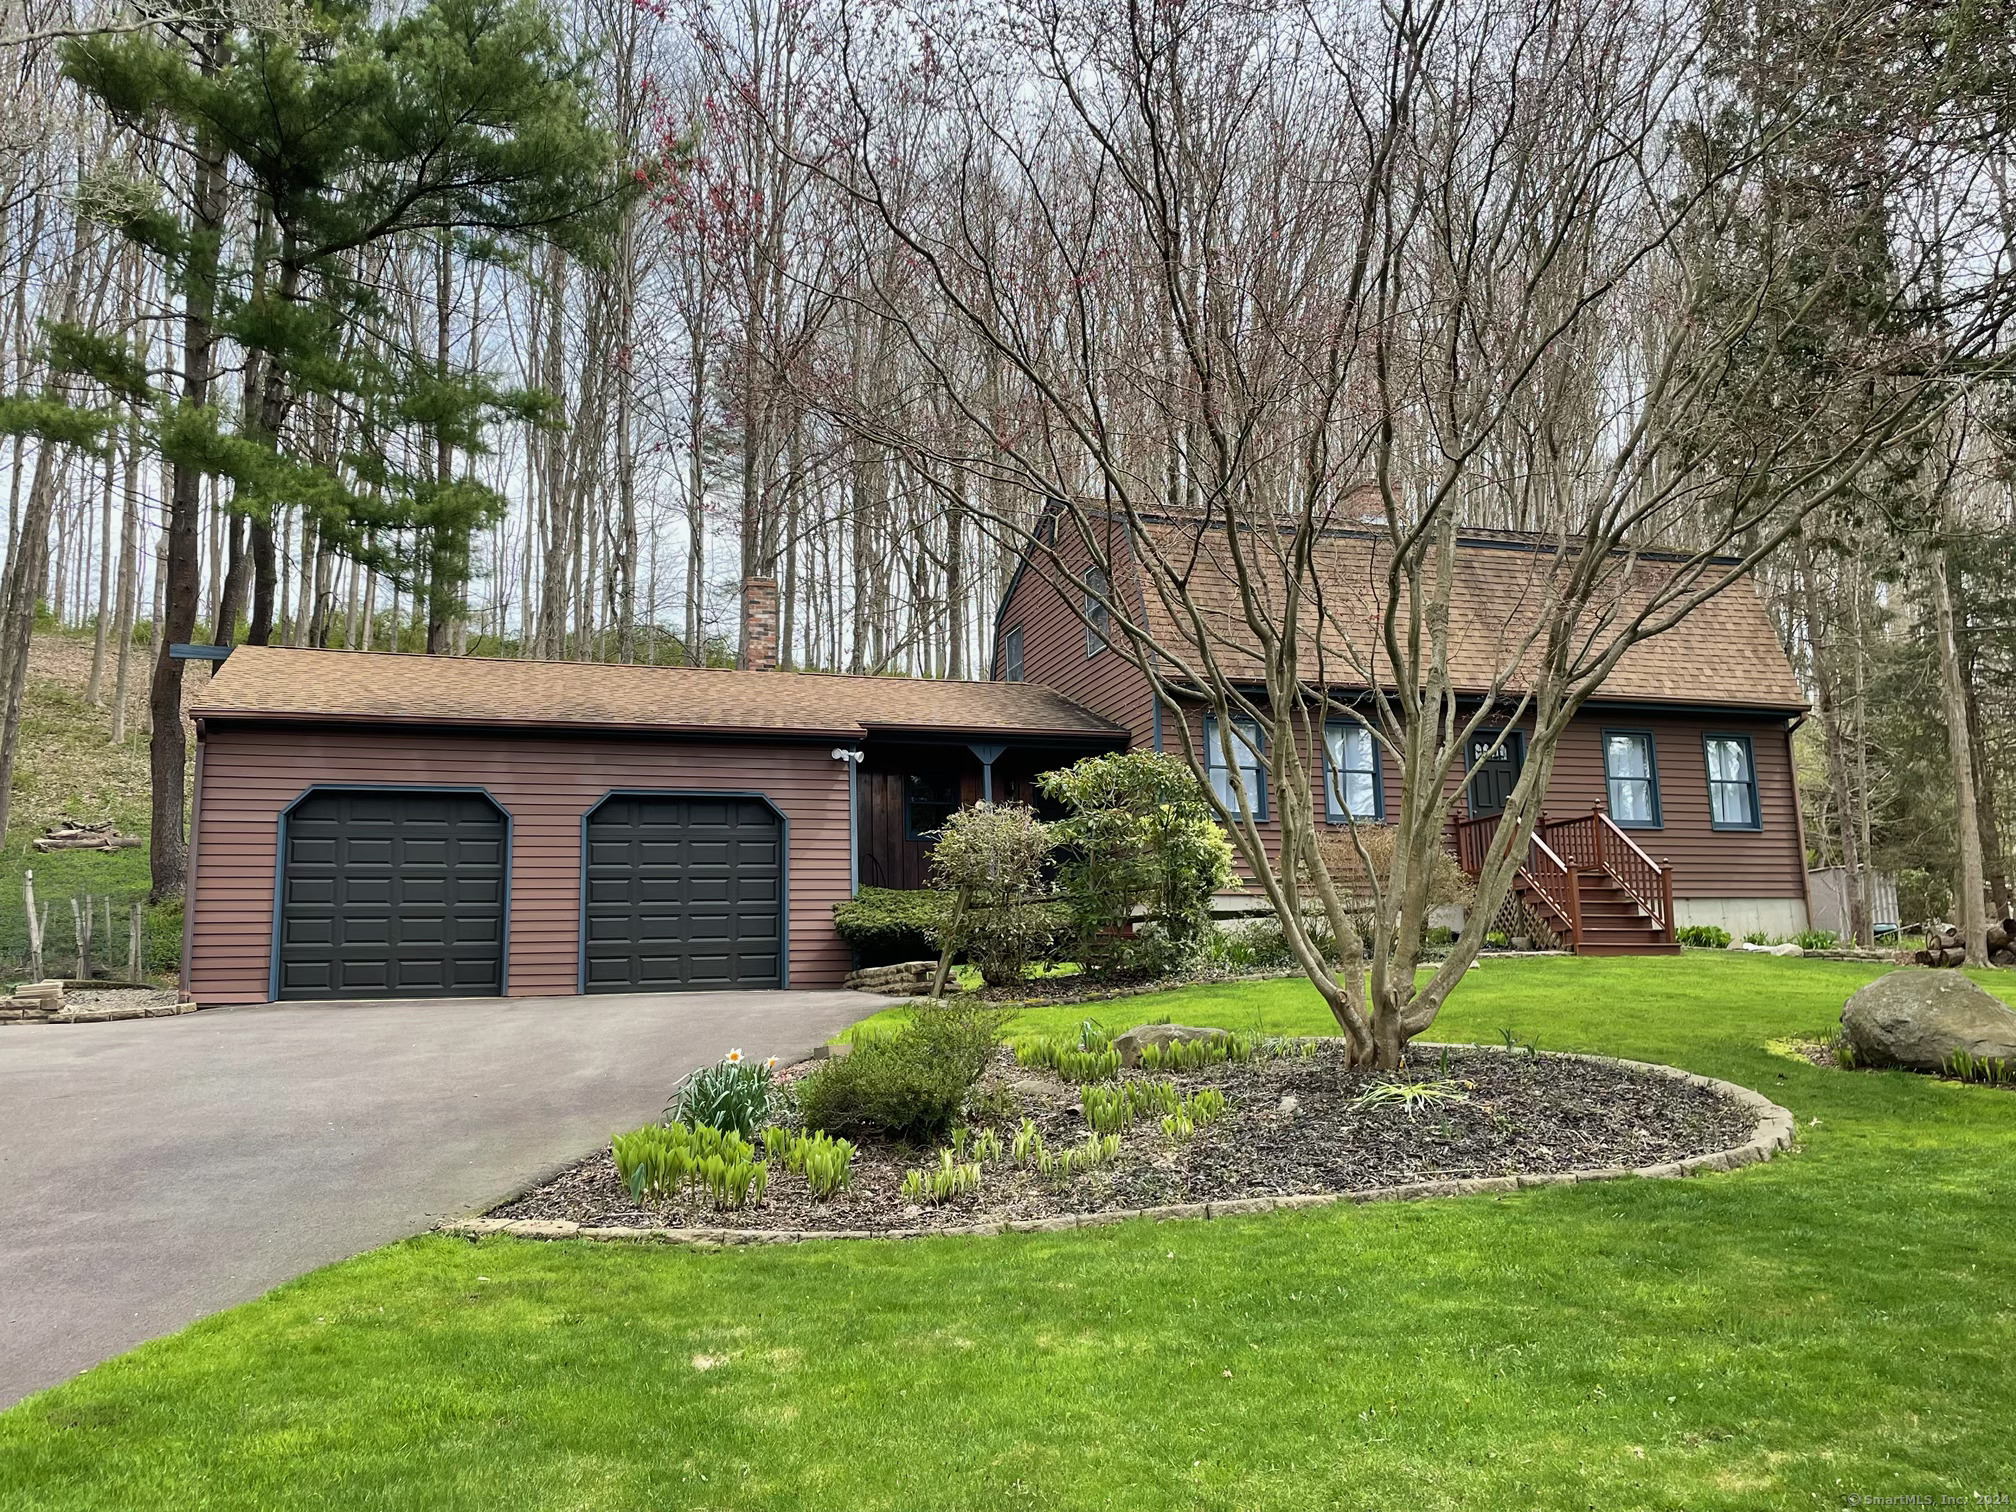 599 Durham Road, Guilford, Connecticut - 4 Bedrooms  
2 Bathrooms  
8 Rooms - 